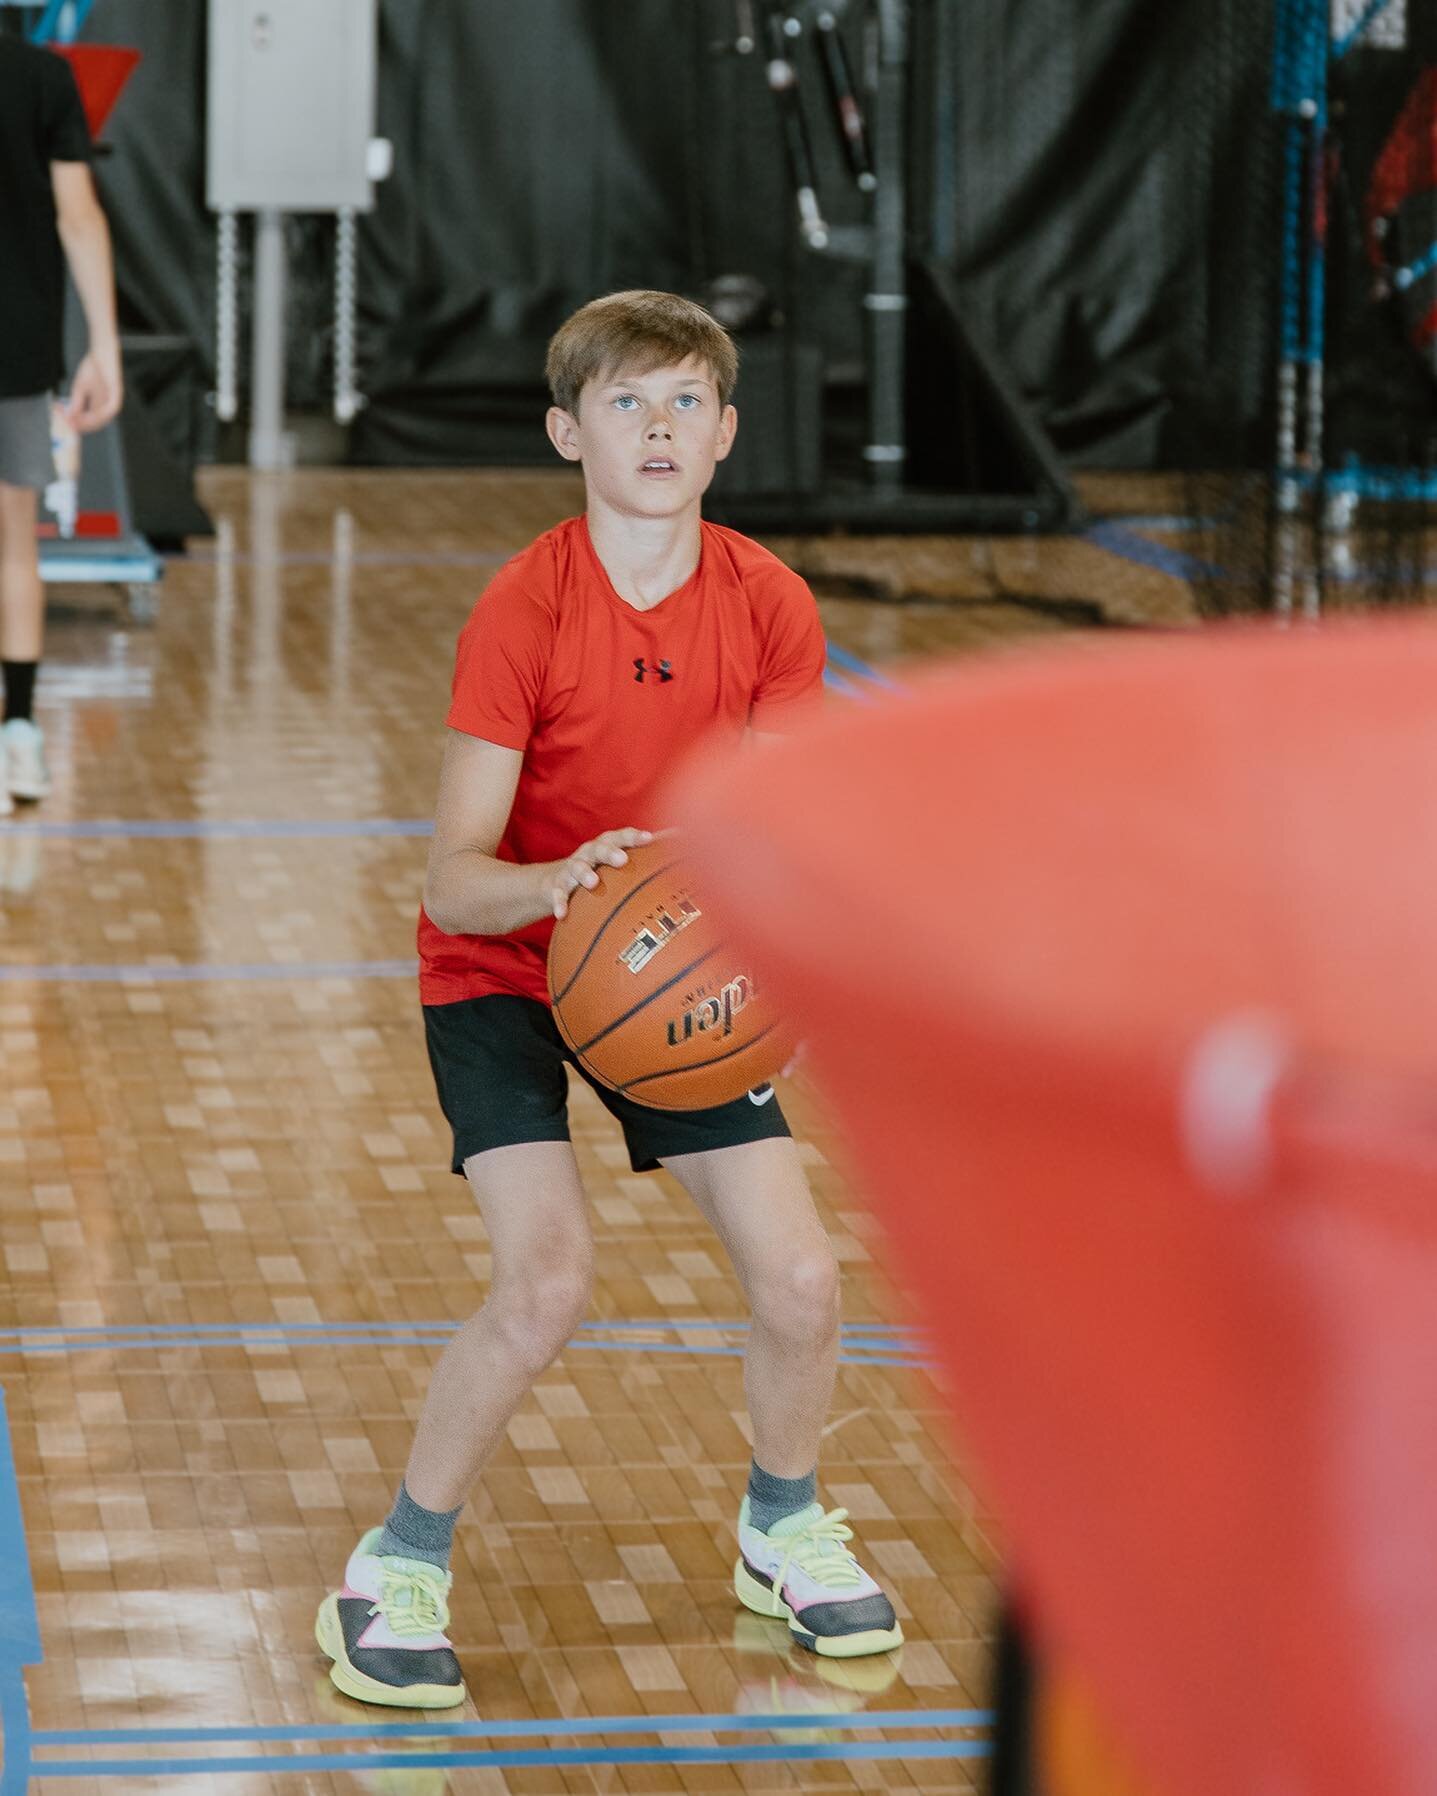 🏀PRIVATE SHOOTING LESSONS🏀

ONLY $25/session

When you sign up for a membership we help you choose by providing you with 4 HALF-HOUR, COACH-LED, private shooting lessons. These lessons will help you get the best experience out of your One Gym Sport